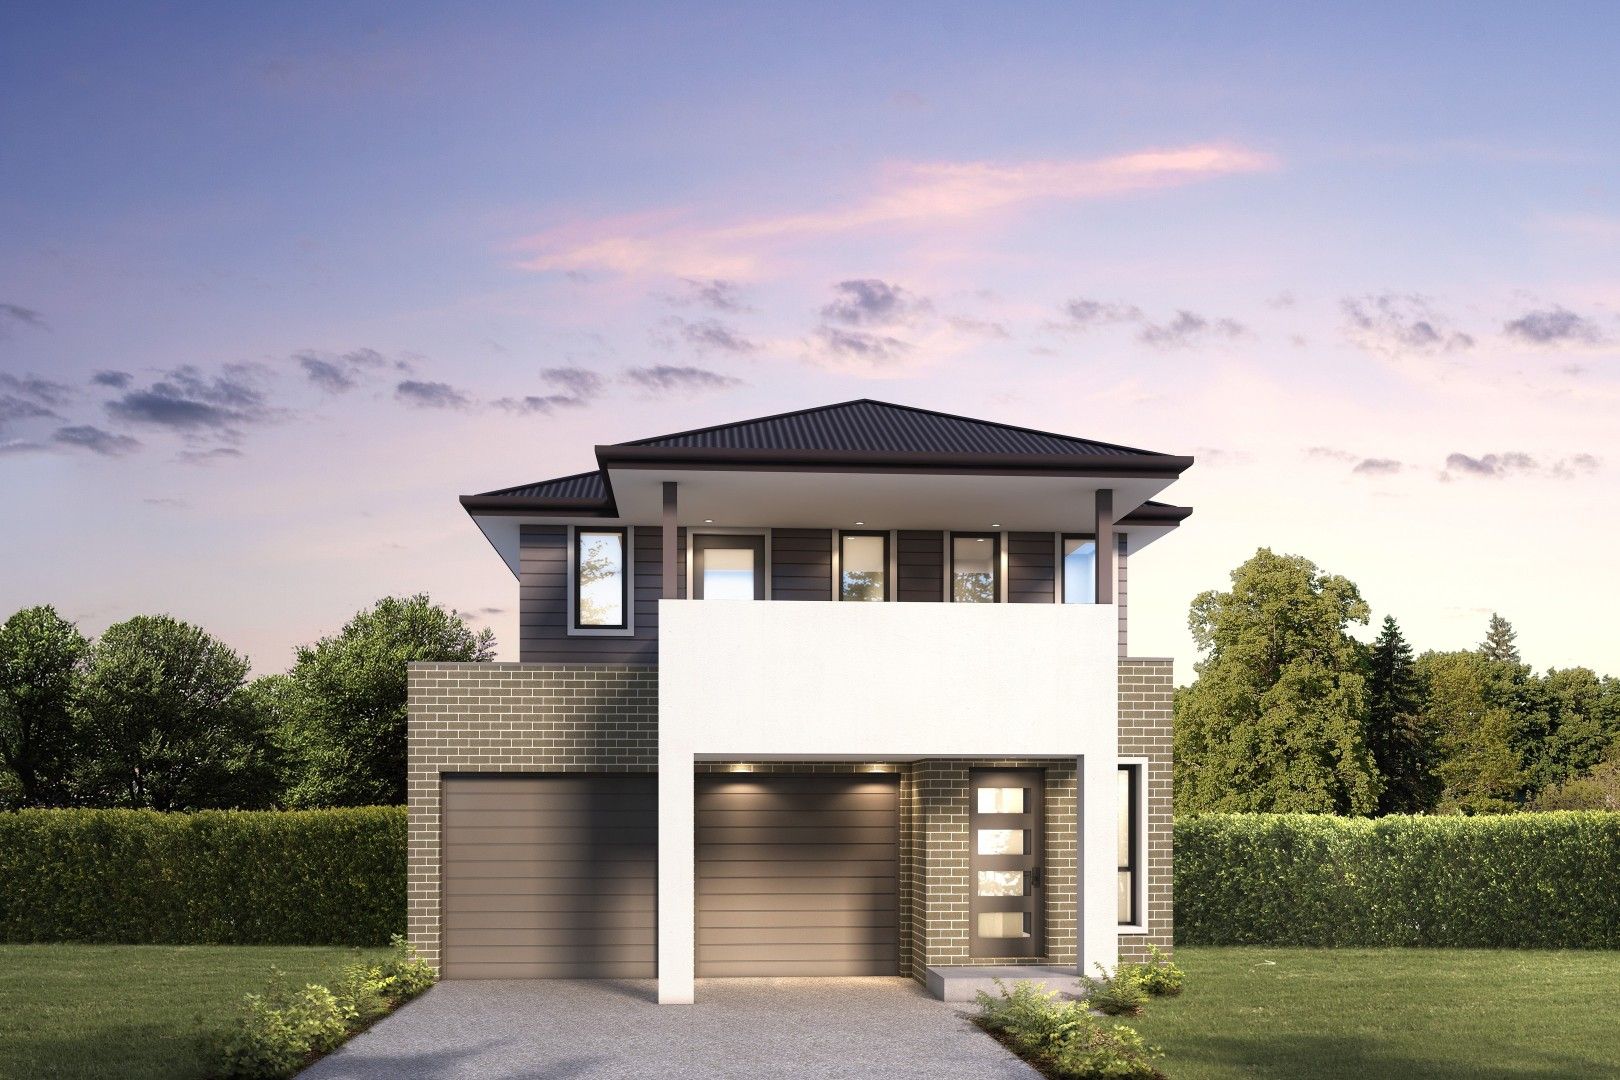 4 bedrooms New House & Land in Lot 4519 Bluegate Street BOX HILL NSW, 2765